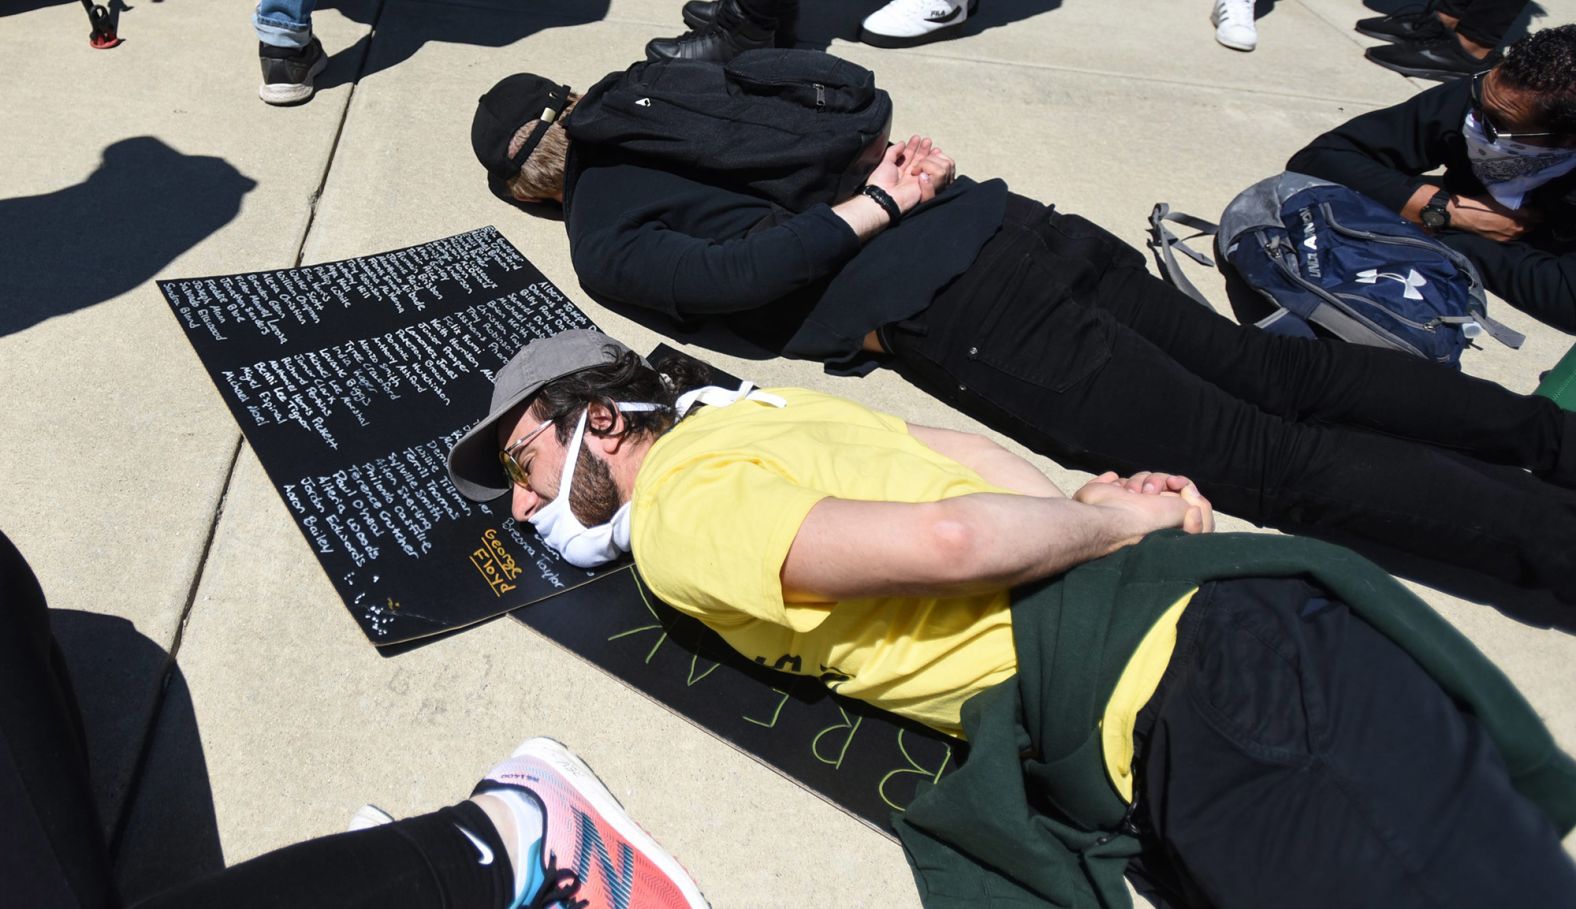 People lie down during a rally at the State Capitol in Lansing, Michigan, on Sunday, May 31.